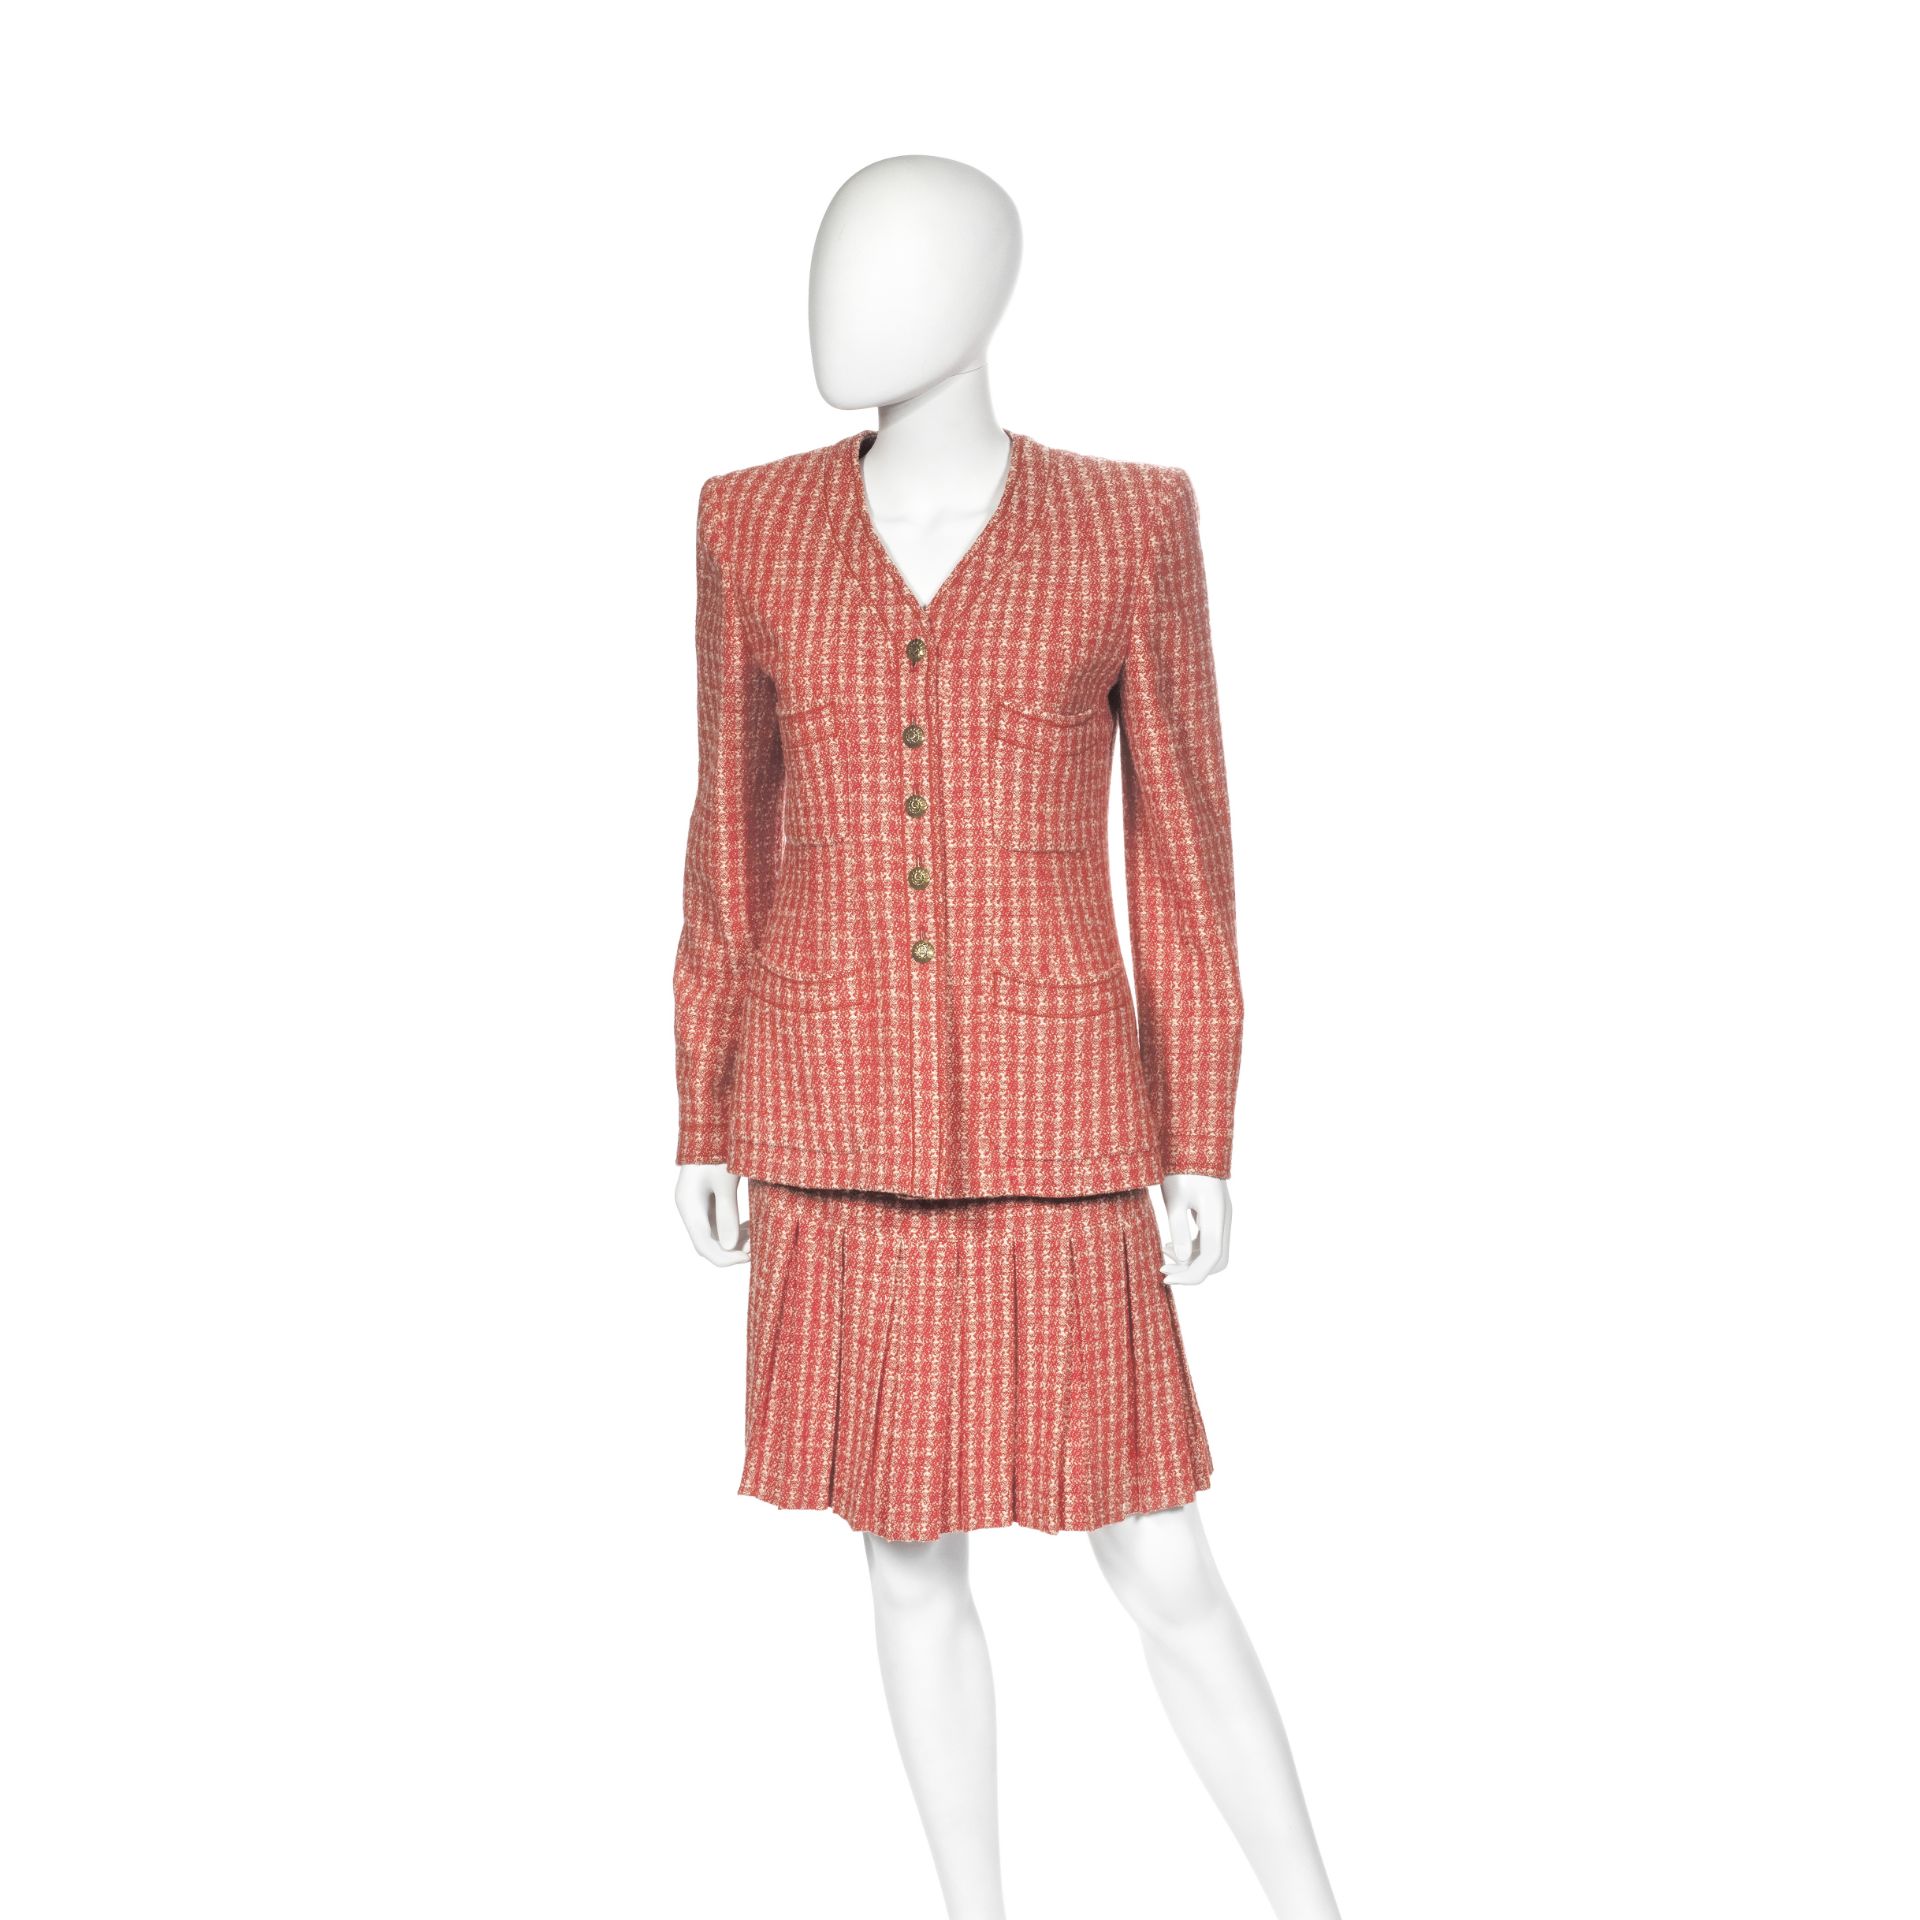 Red and White Wool Skirt Suit, Chanel, c. 1997,